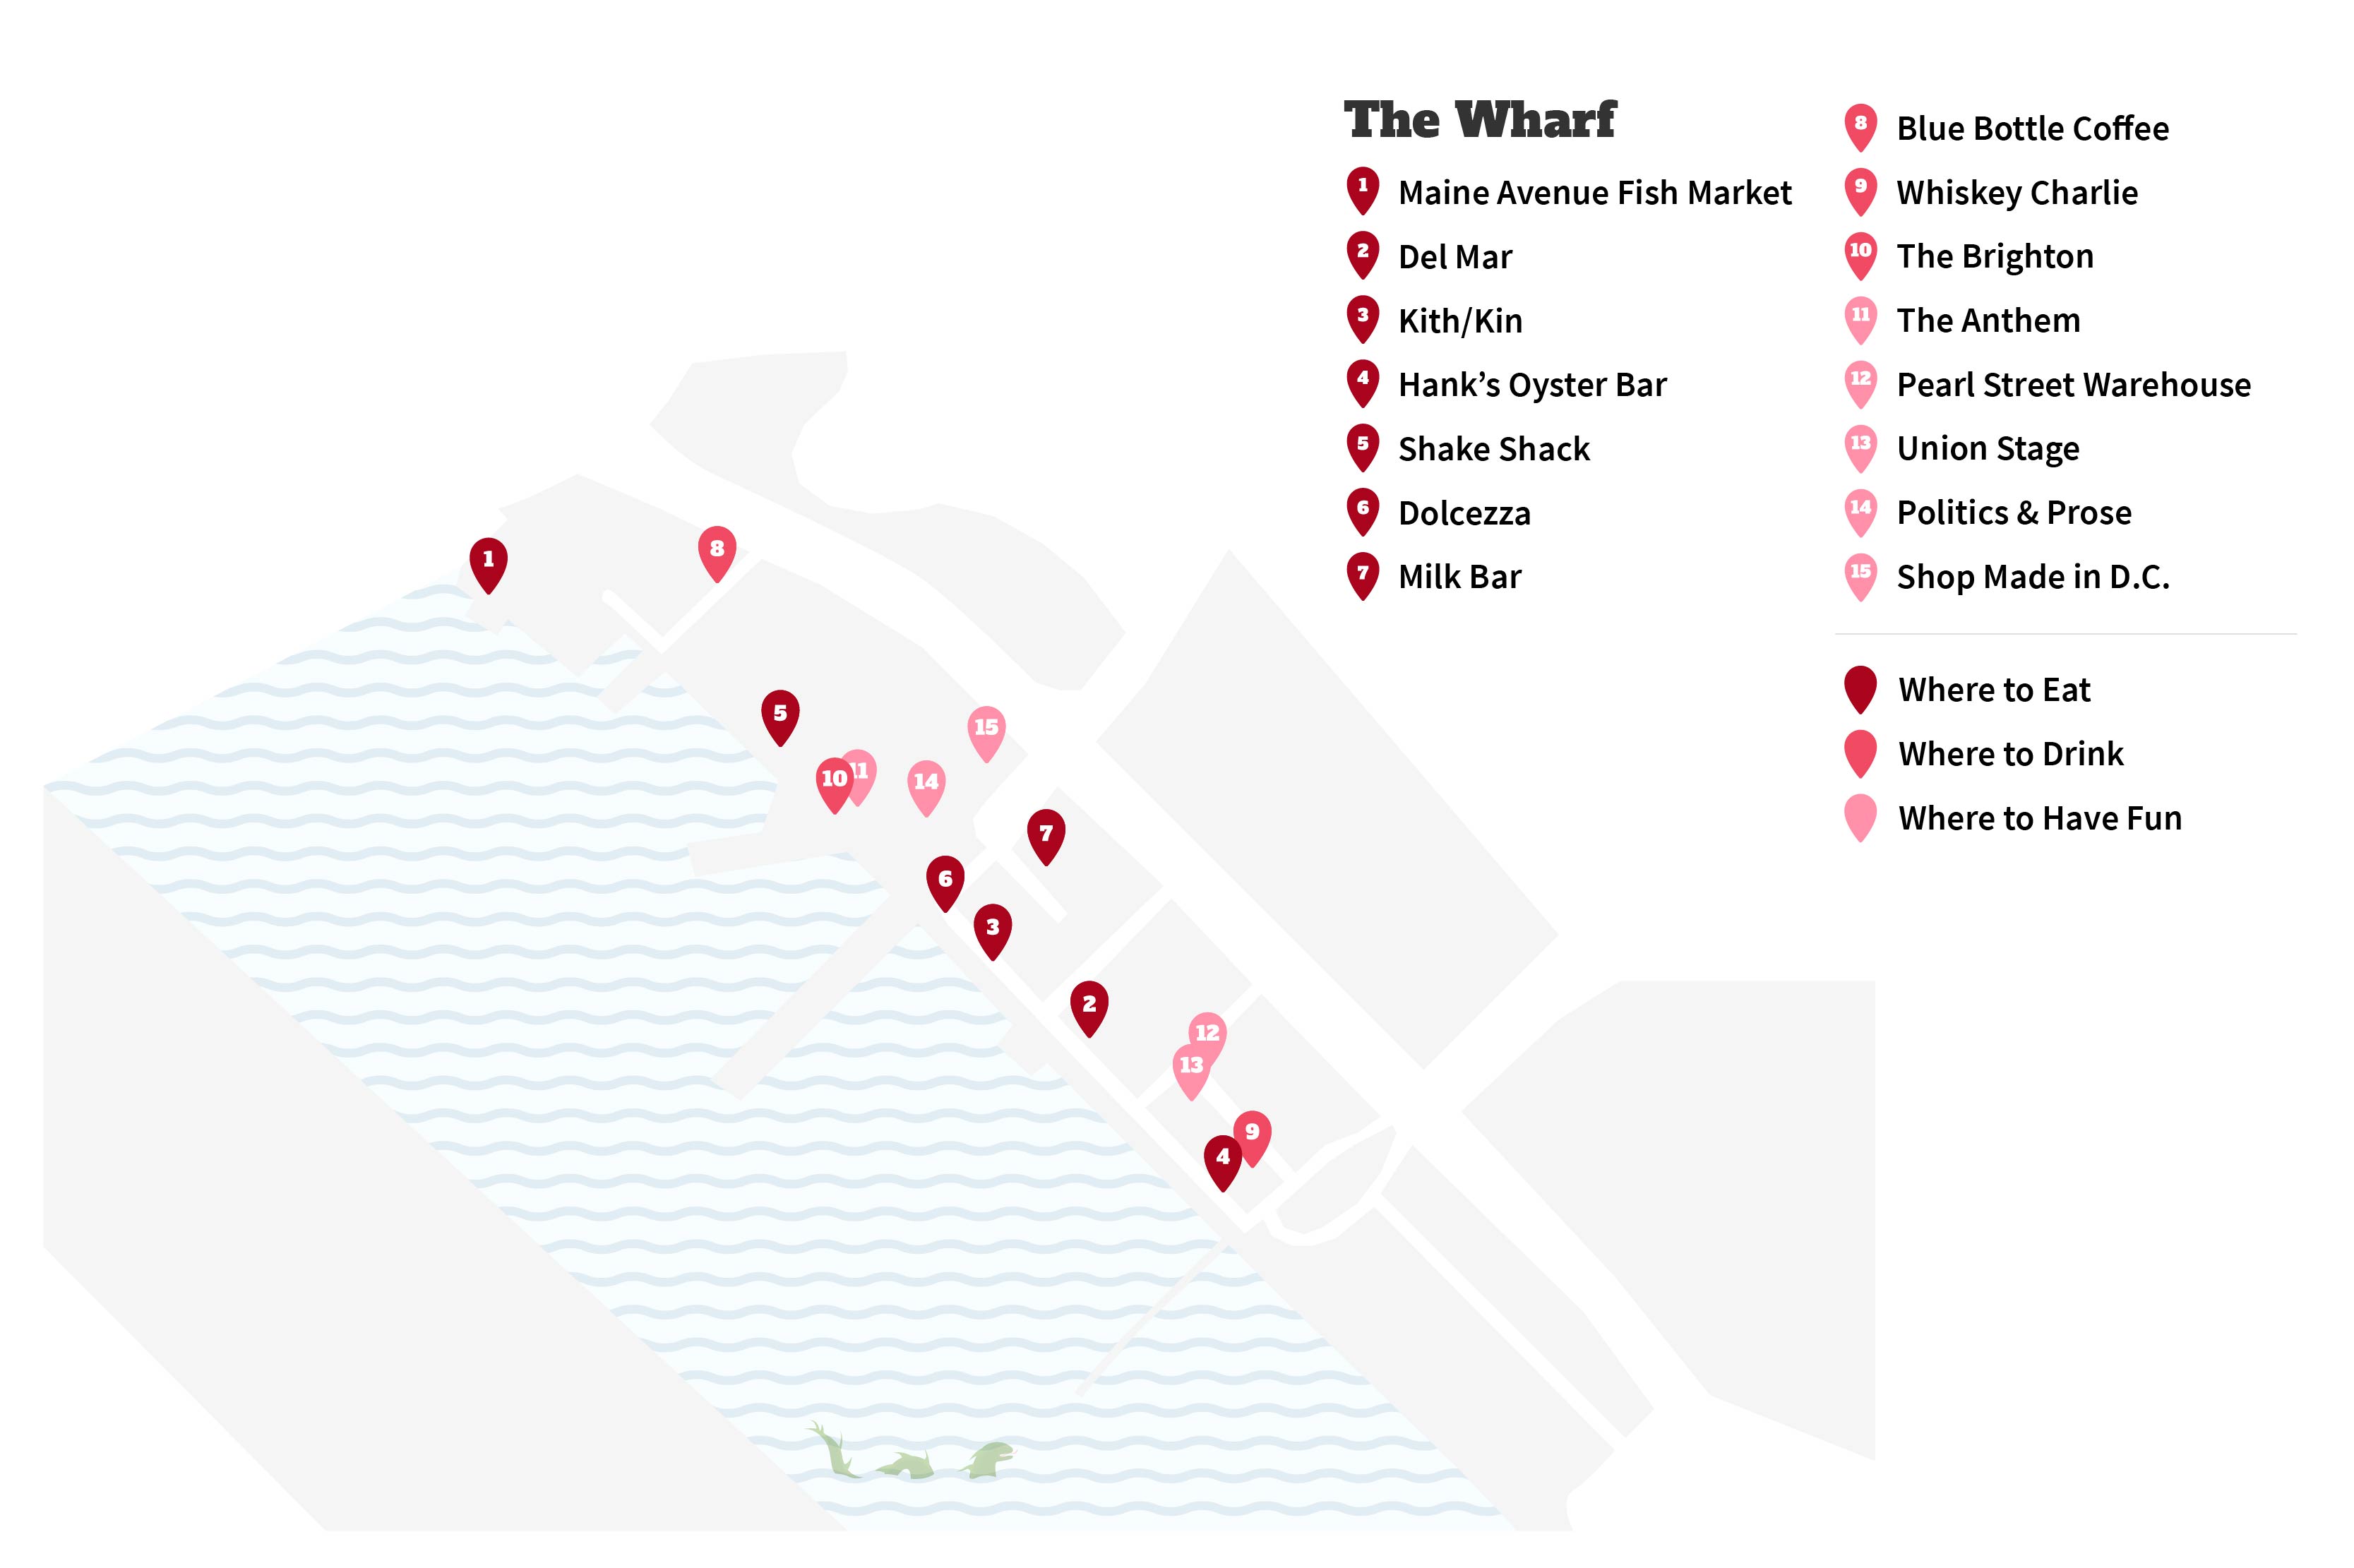 Your Guide To The Wharf In Washington, D.c.